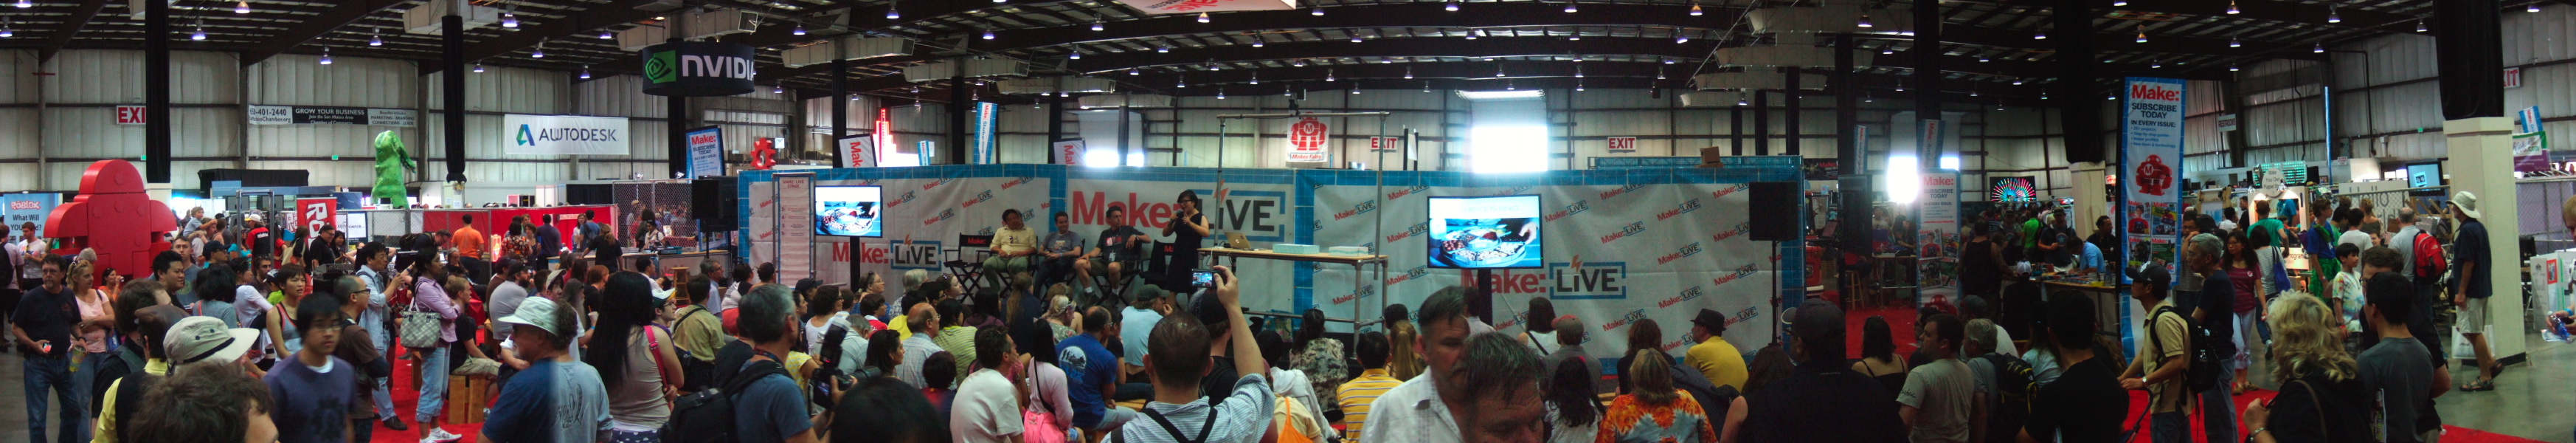 Make Live at the Maker Faire